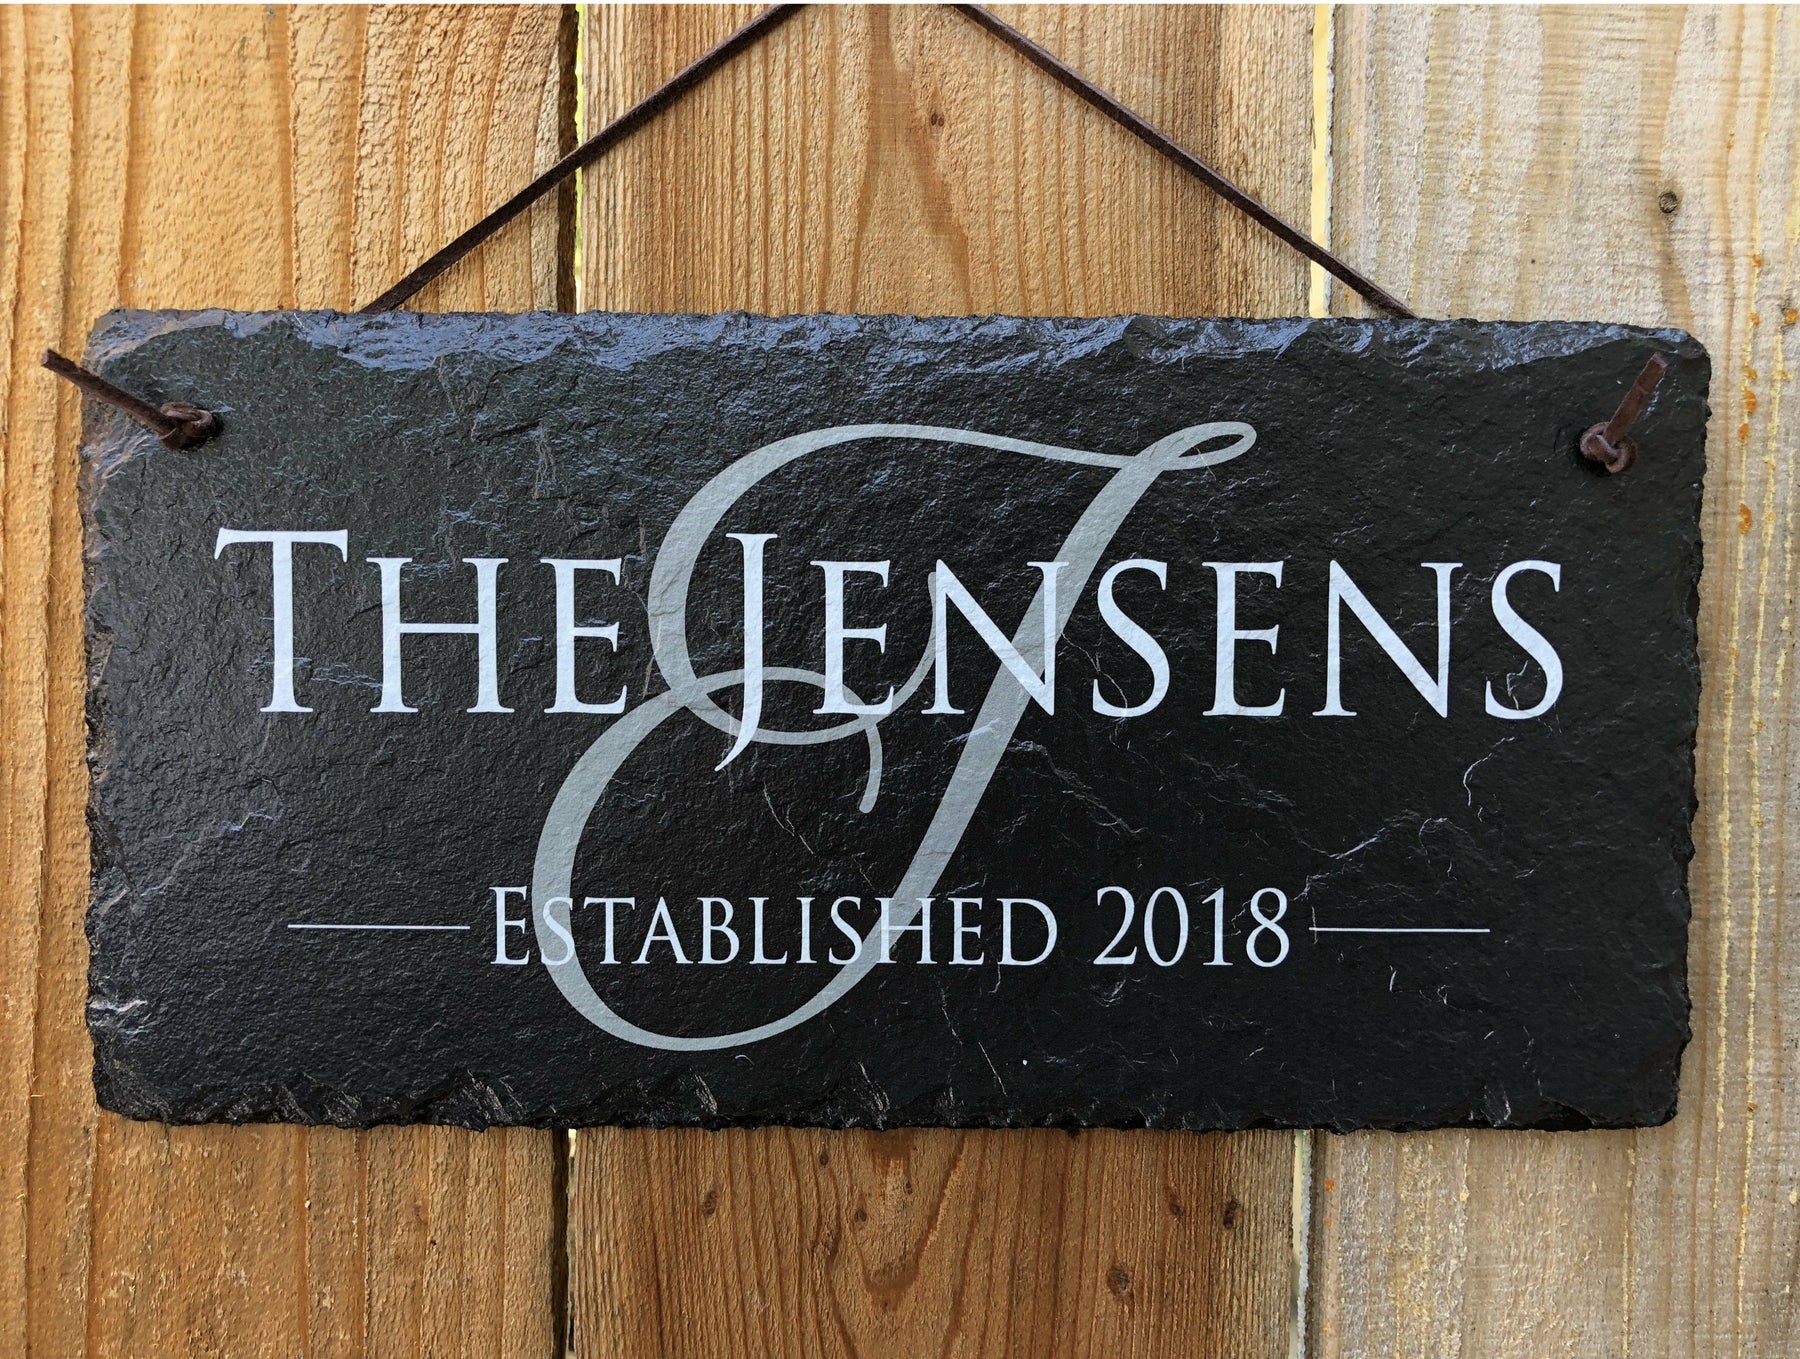 Personalized Welcome To The Home Established Date Plaque